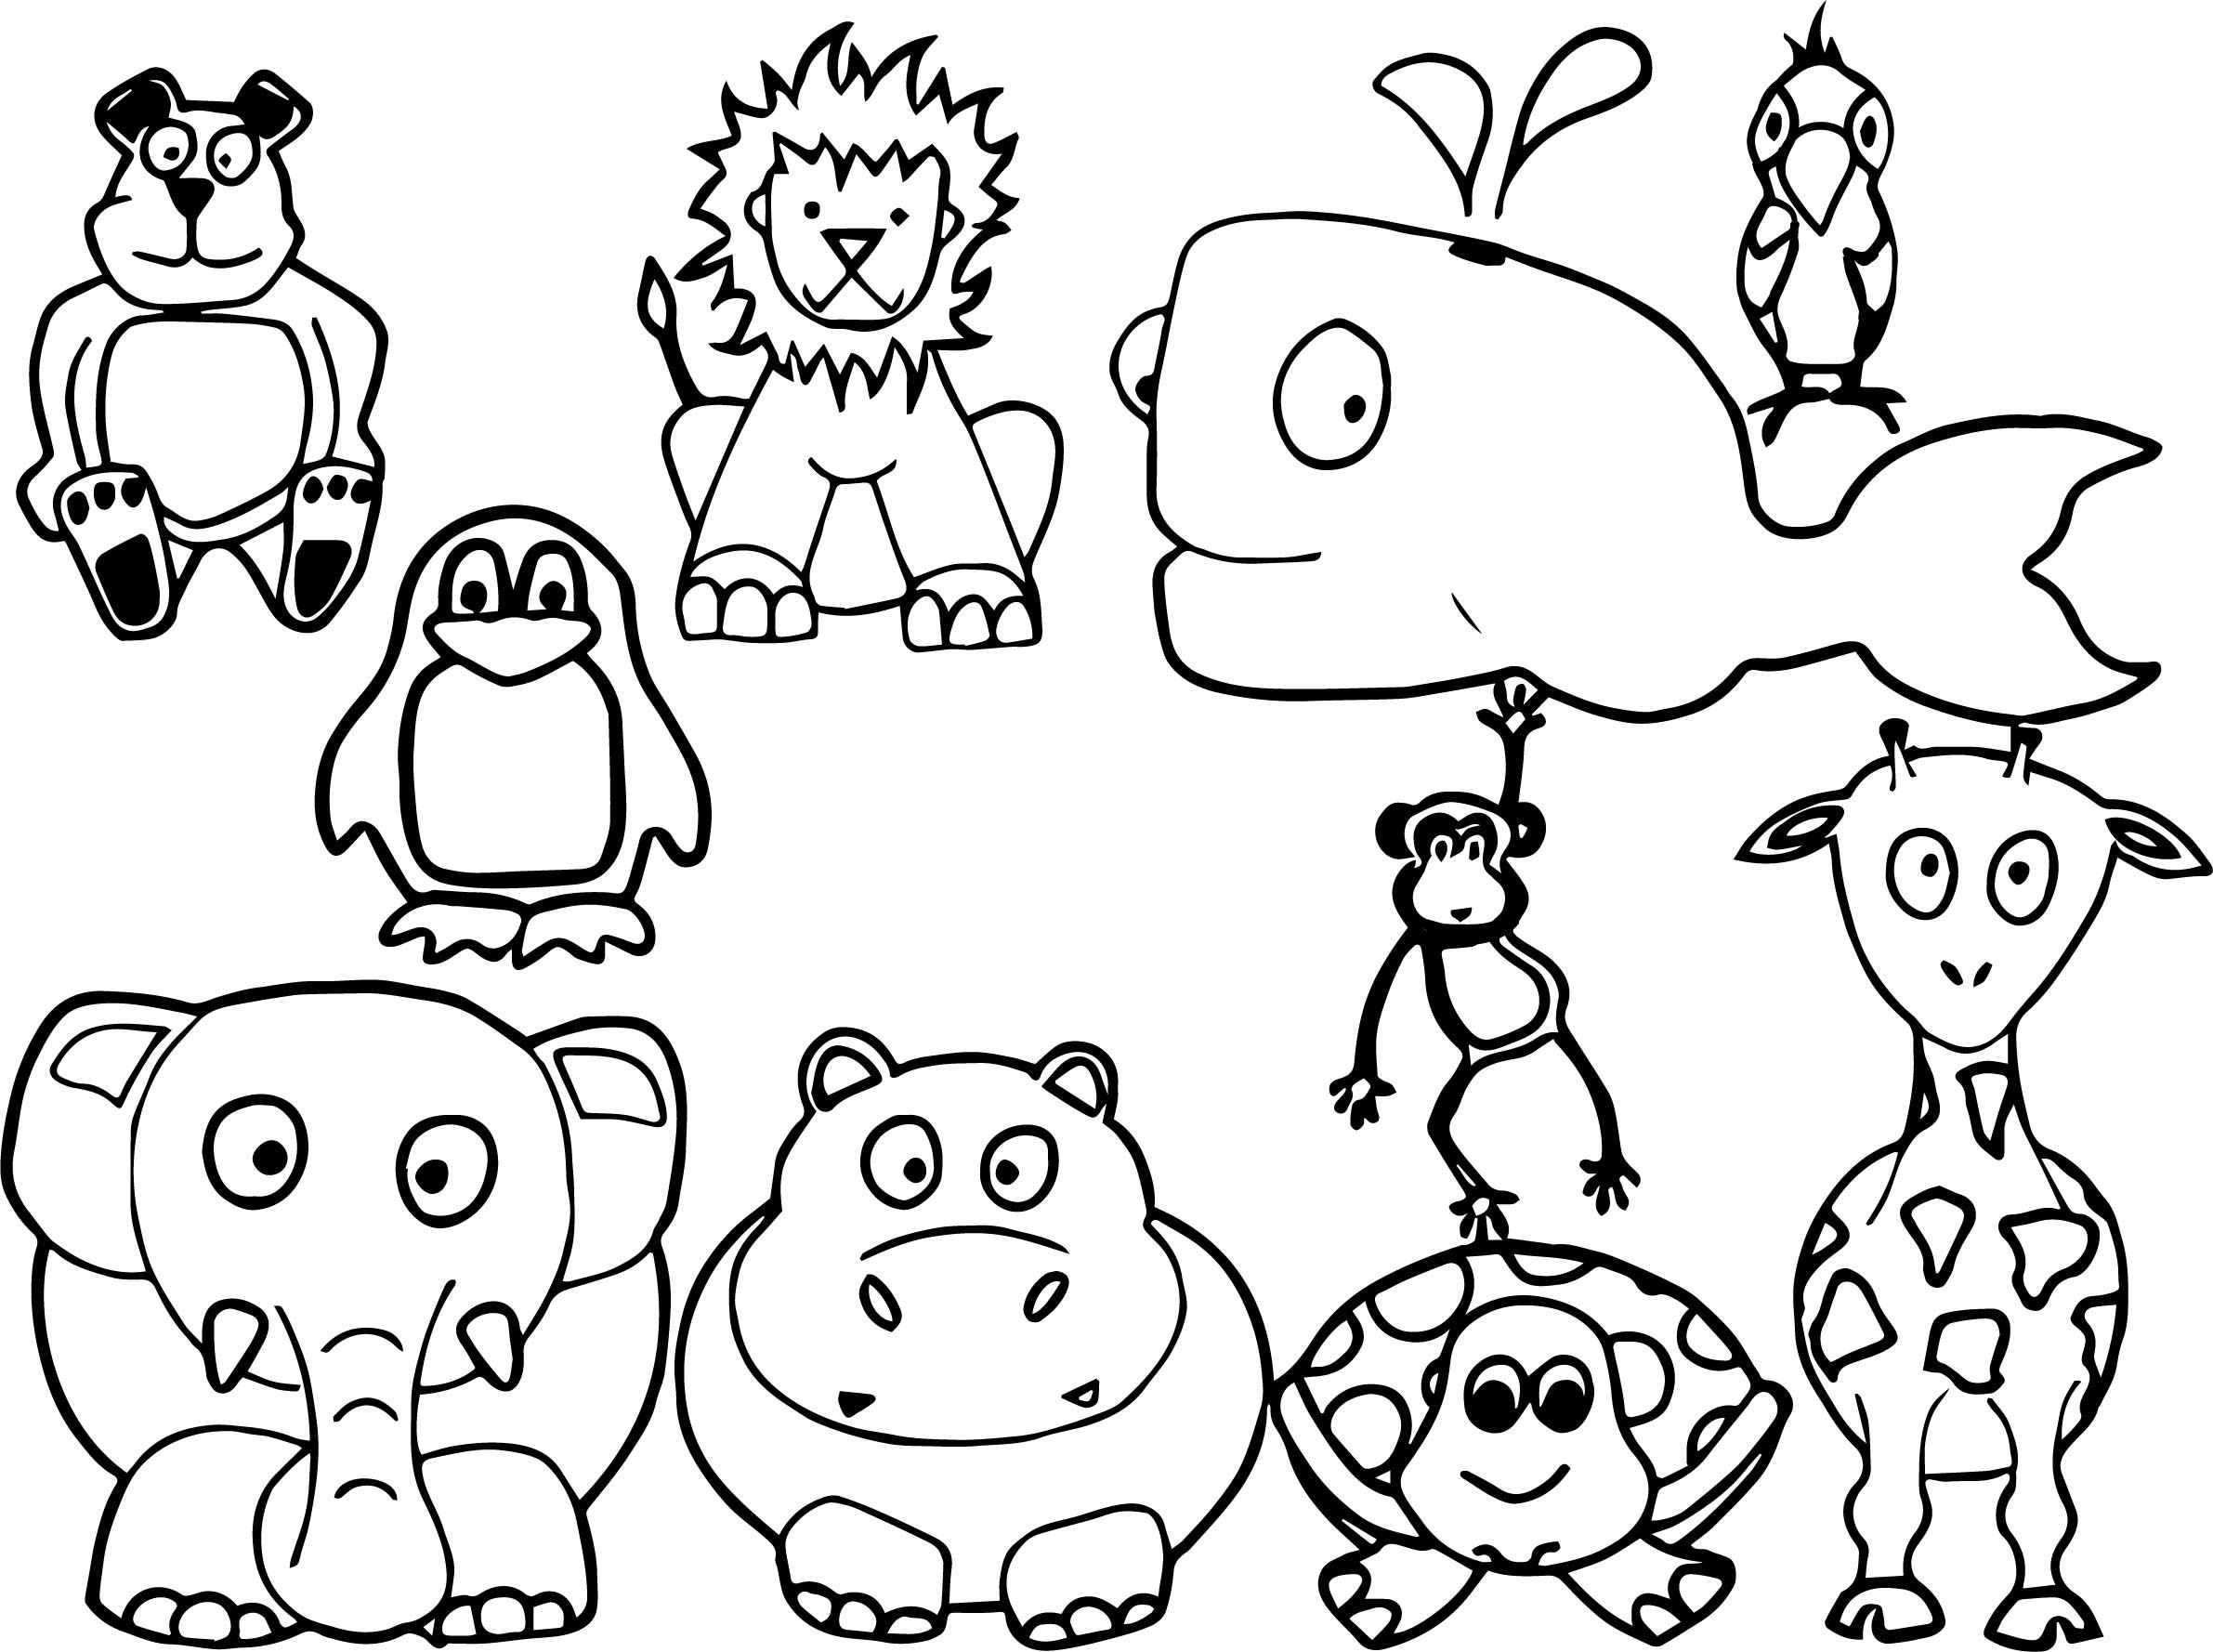 Baby Farm Animal Coloring Pages
 All Baby Farm Animal Coloring Page